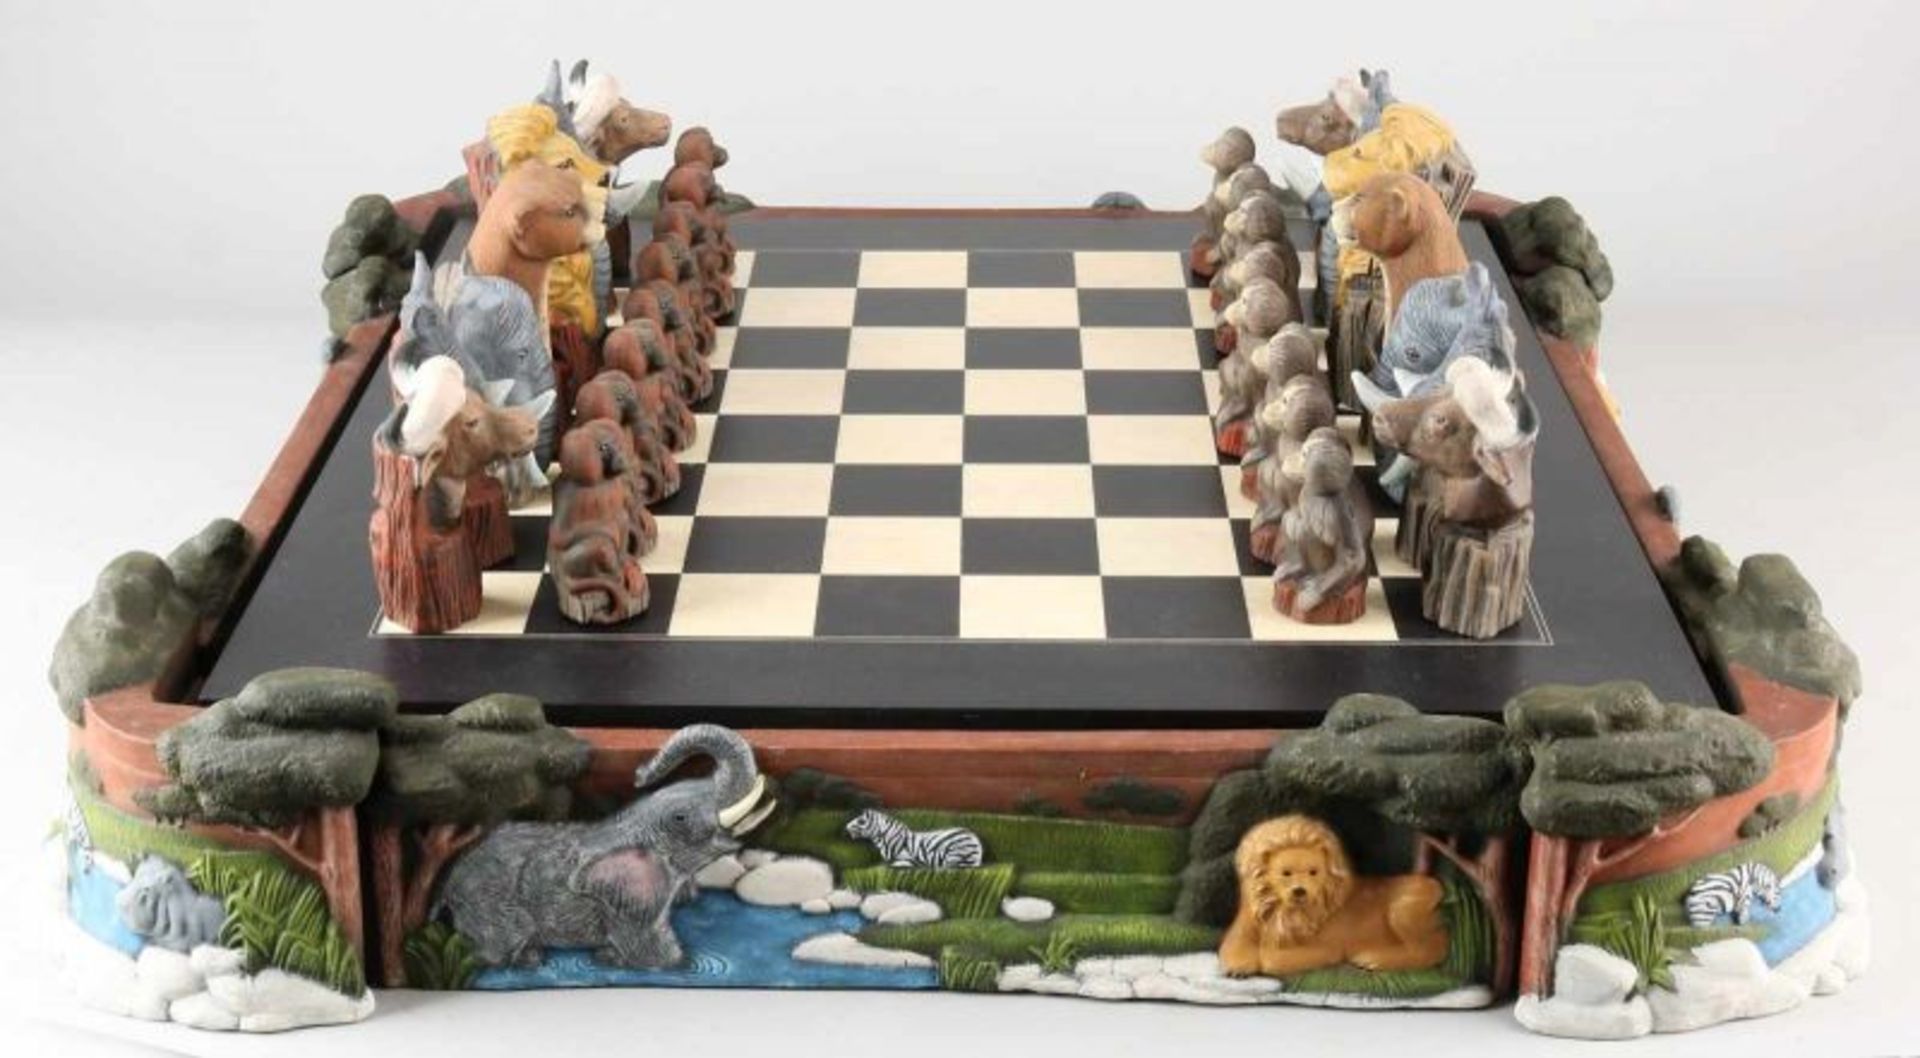 Great African pottery chess with animals + wooden chessboard. Size: 20 x 60 x 60 cm. In good